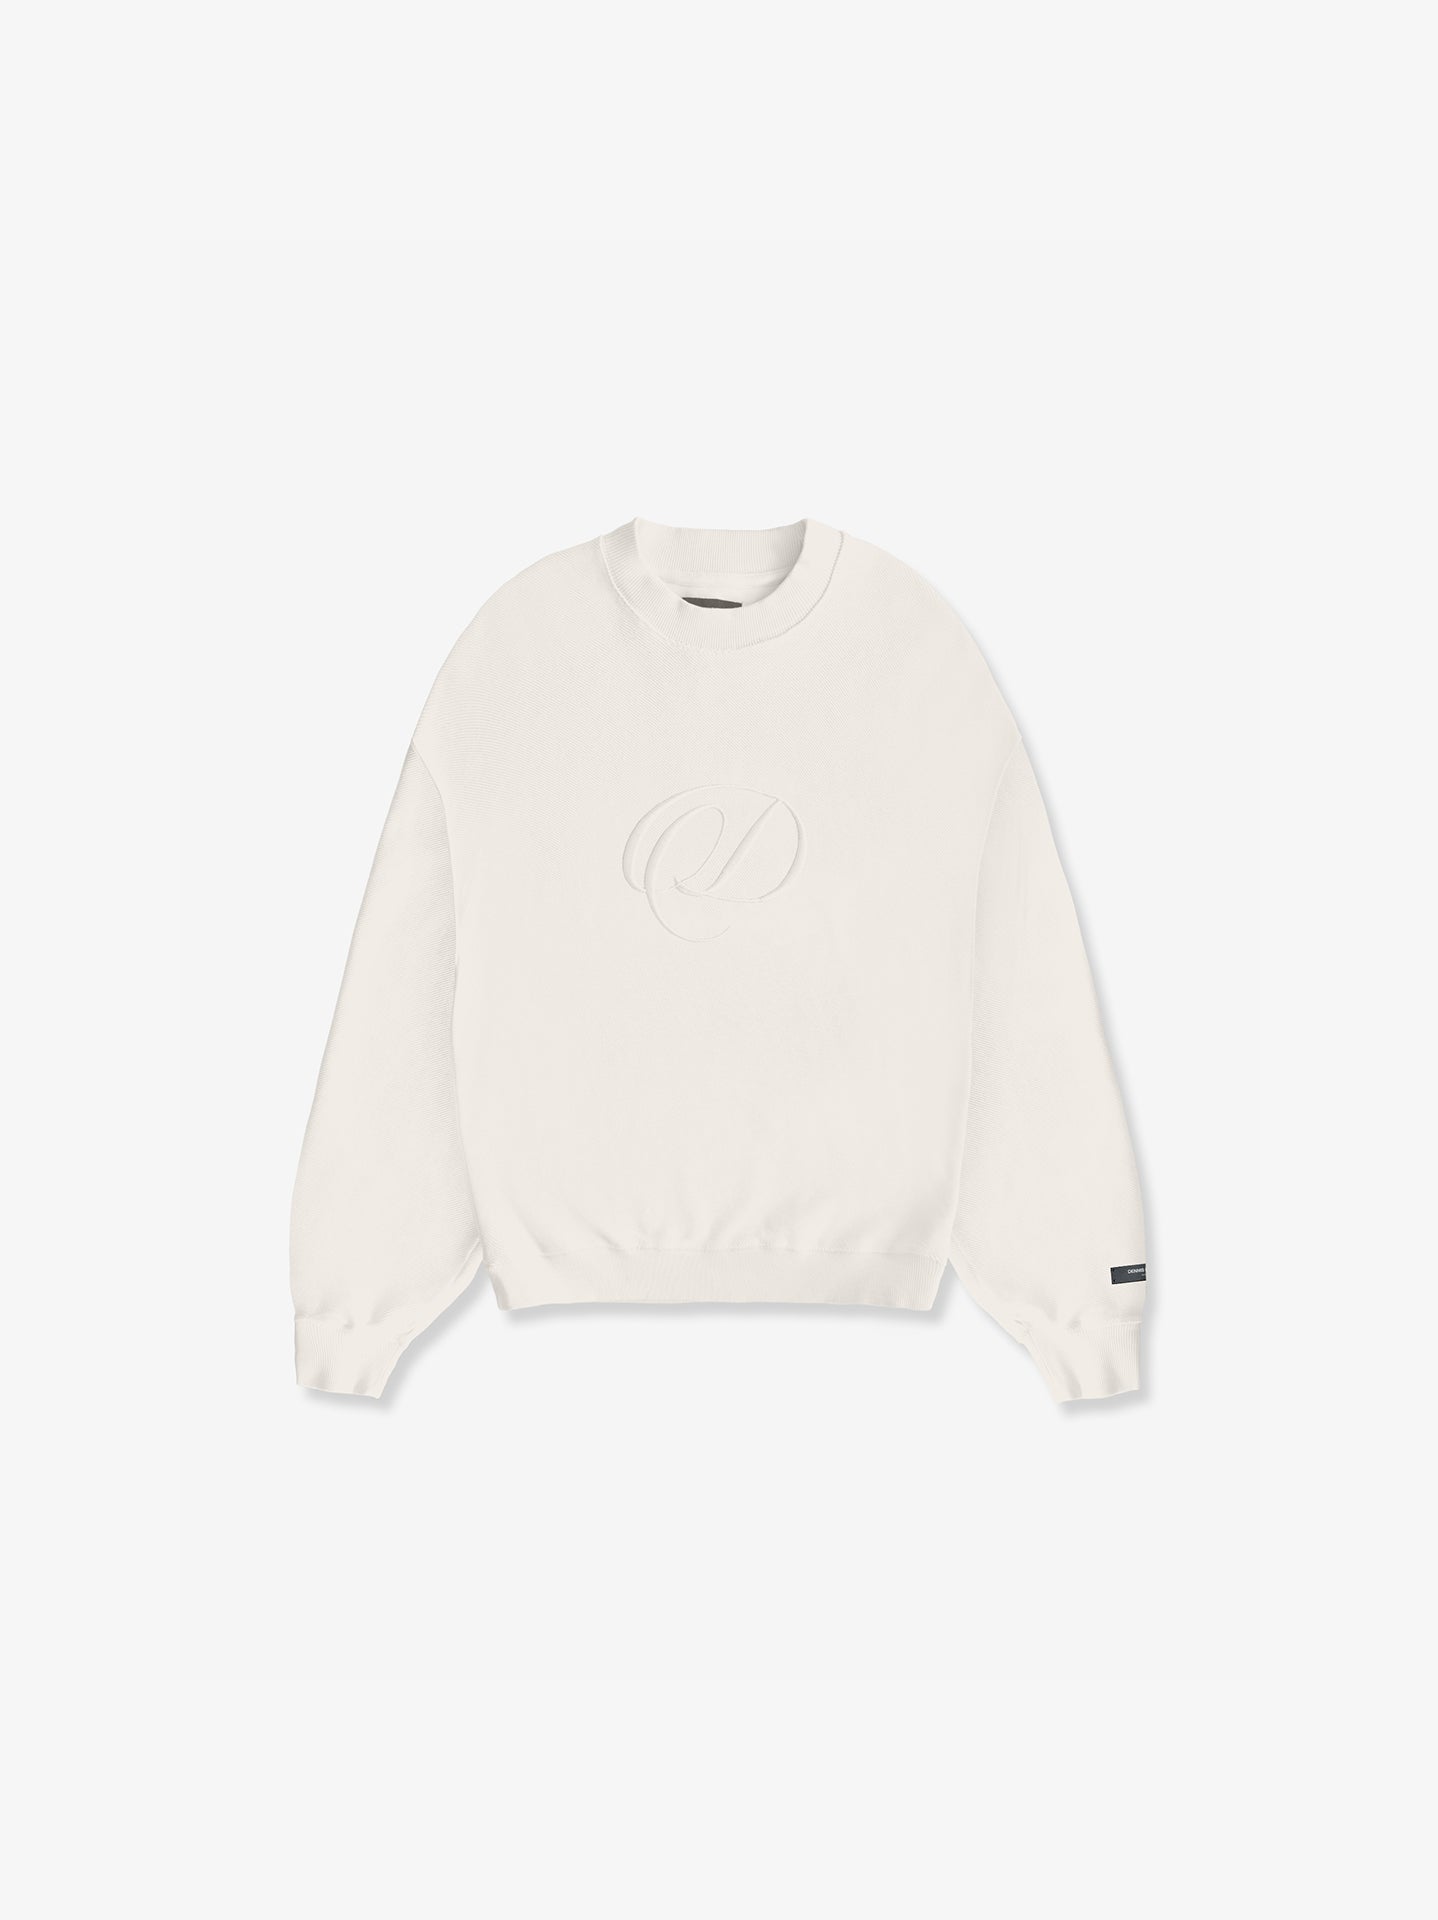 Inside Out Sweater - Off White